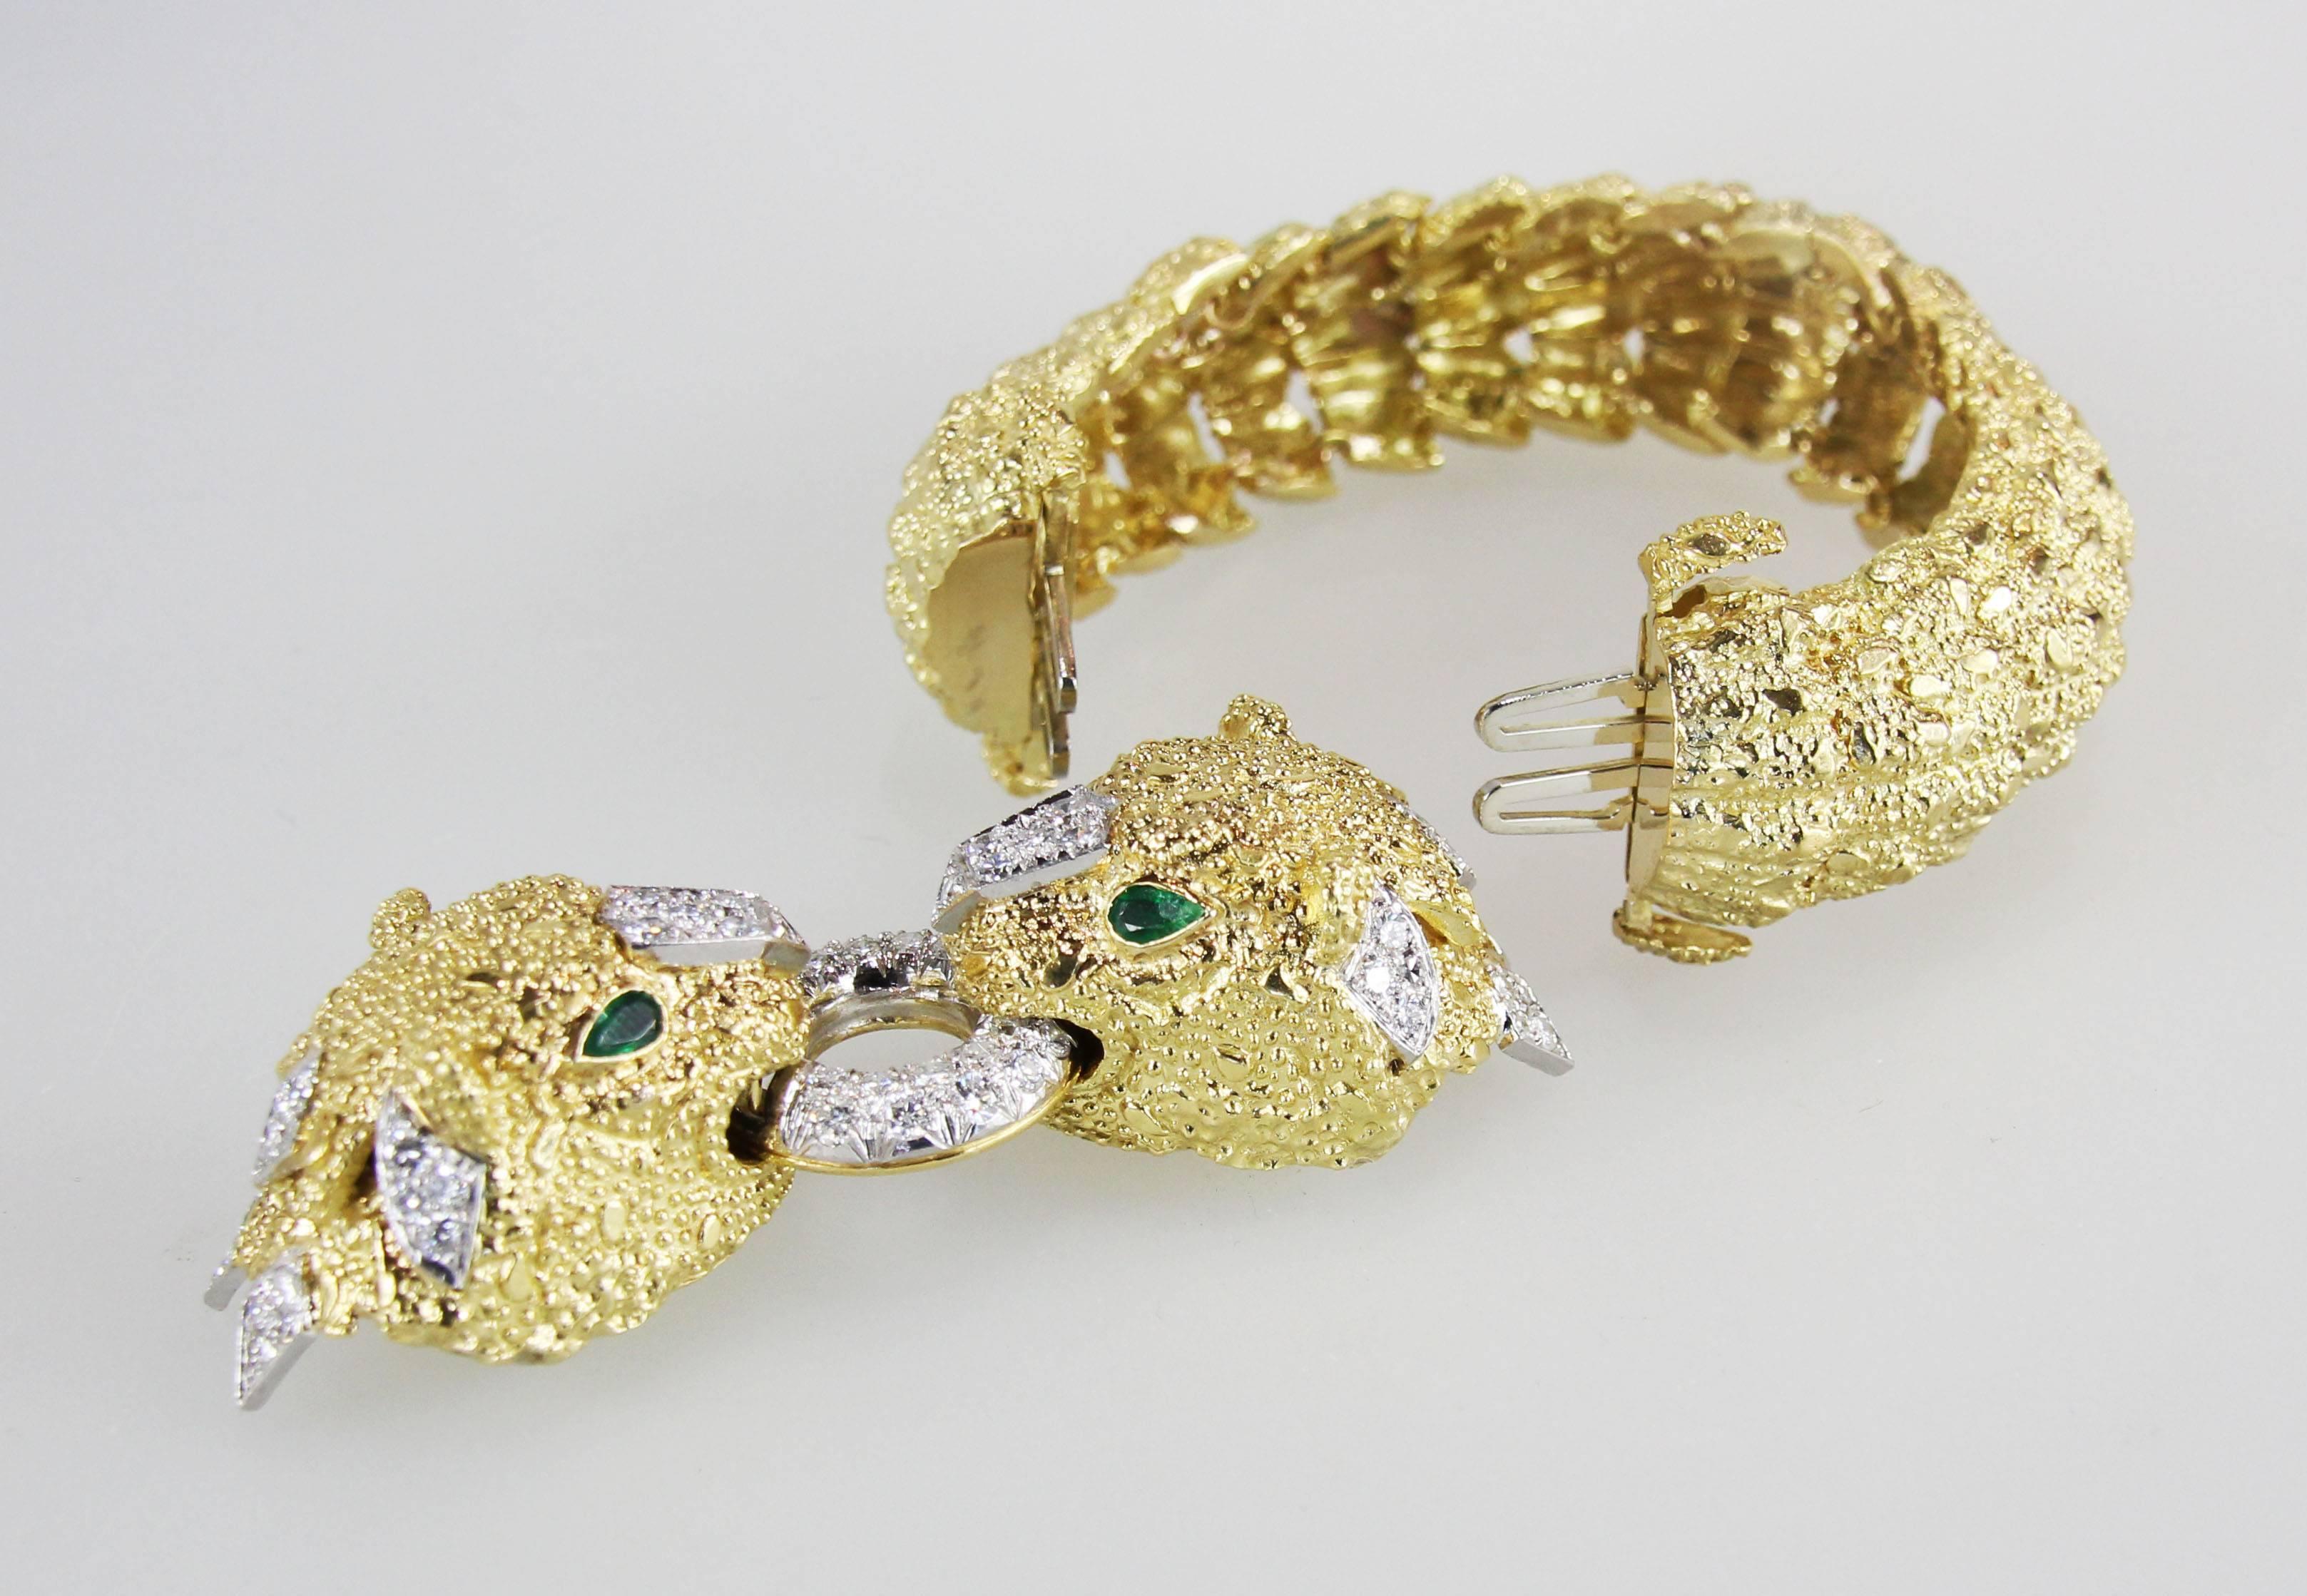 Women's Diamond Gold Panther Bracelet with Interchangeable Emerald Bead Section